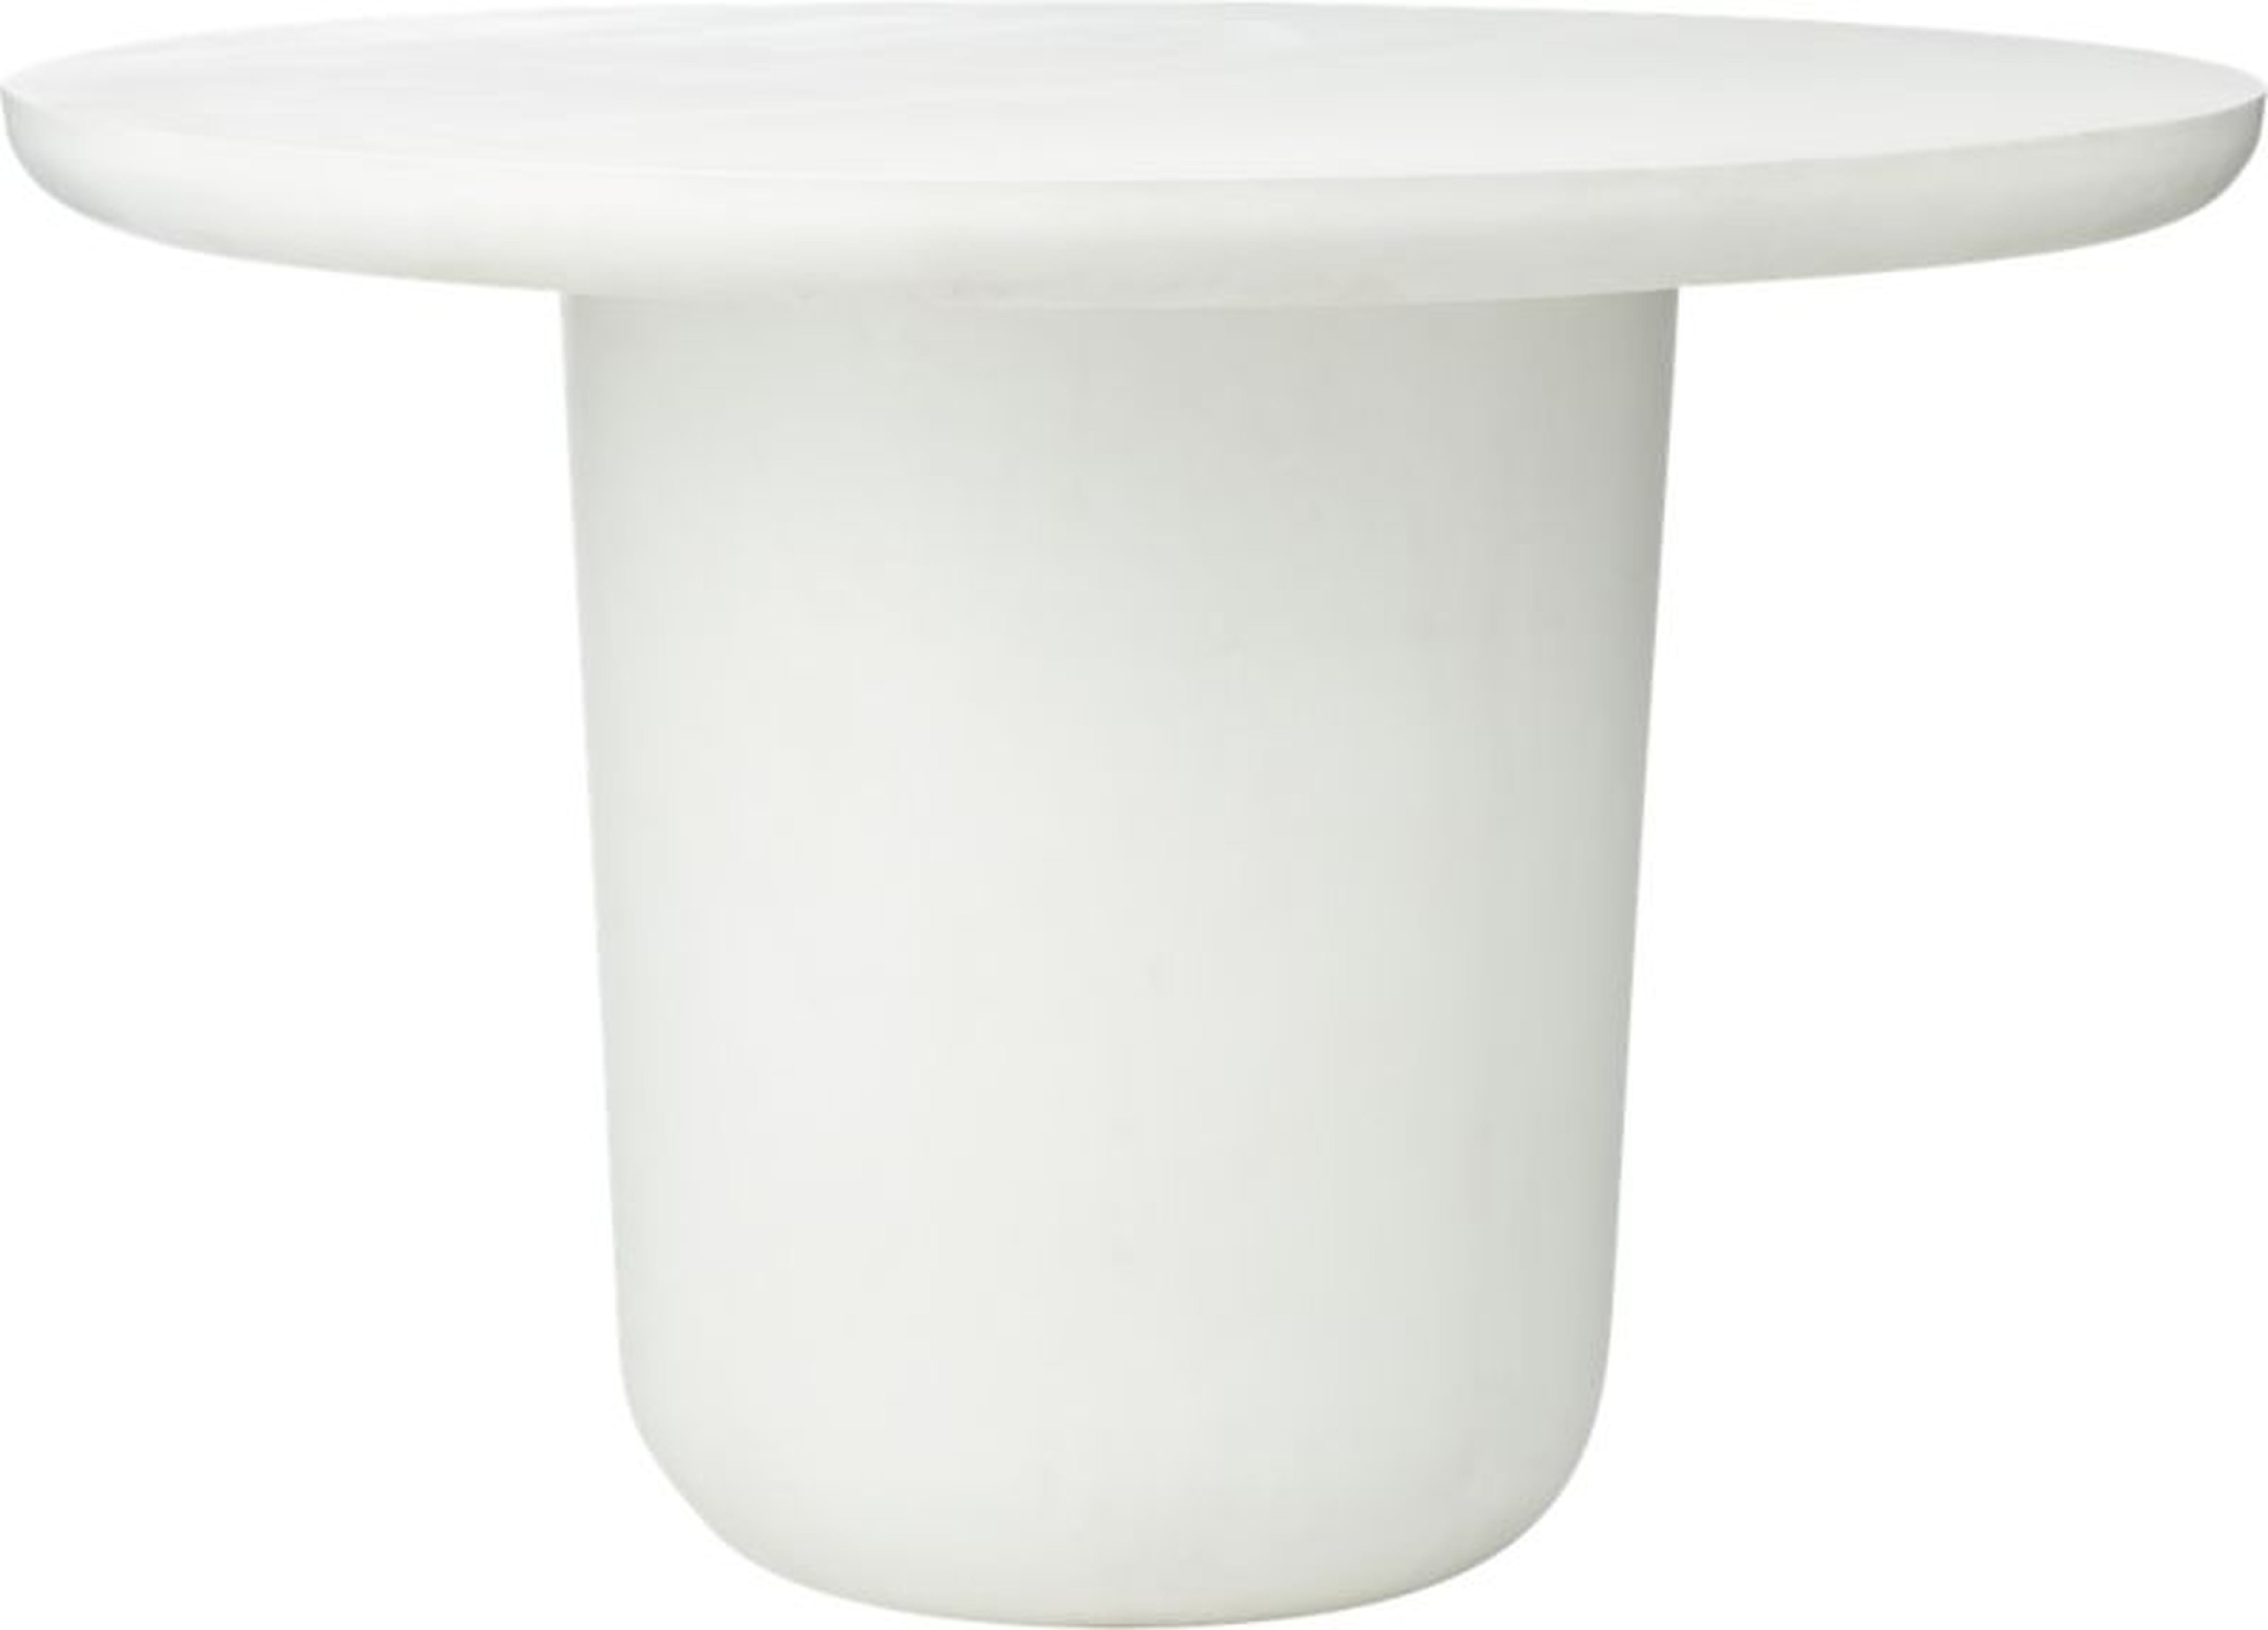 Lola Round Ivory Concrete Dining Table 45" - CB2